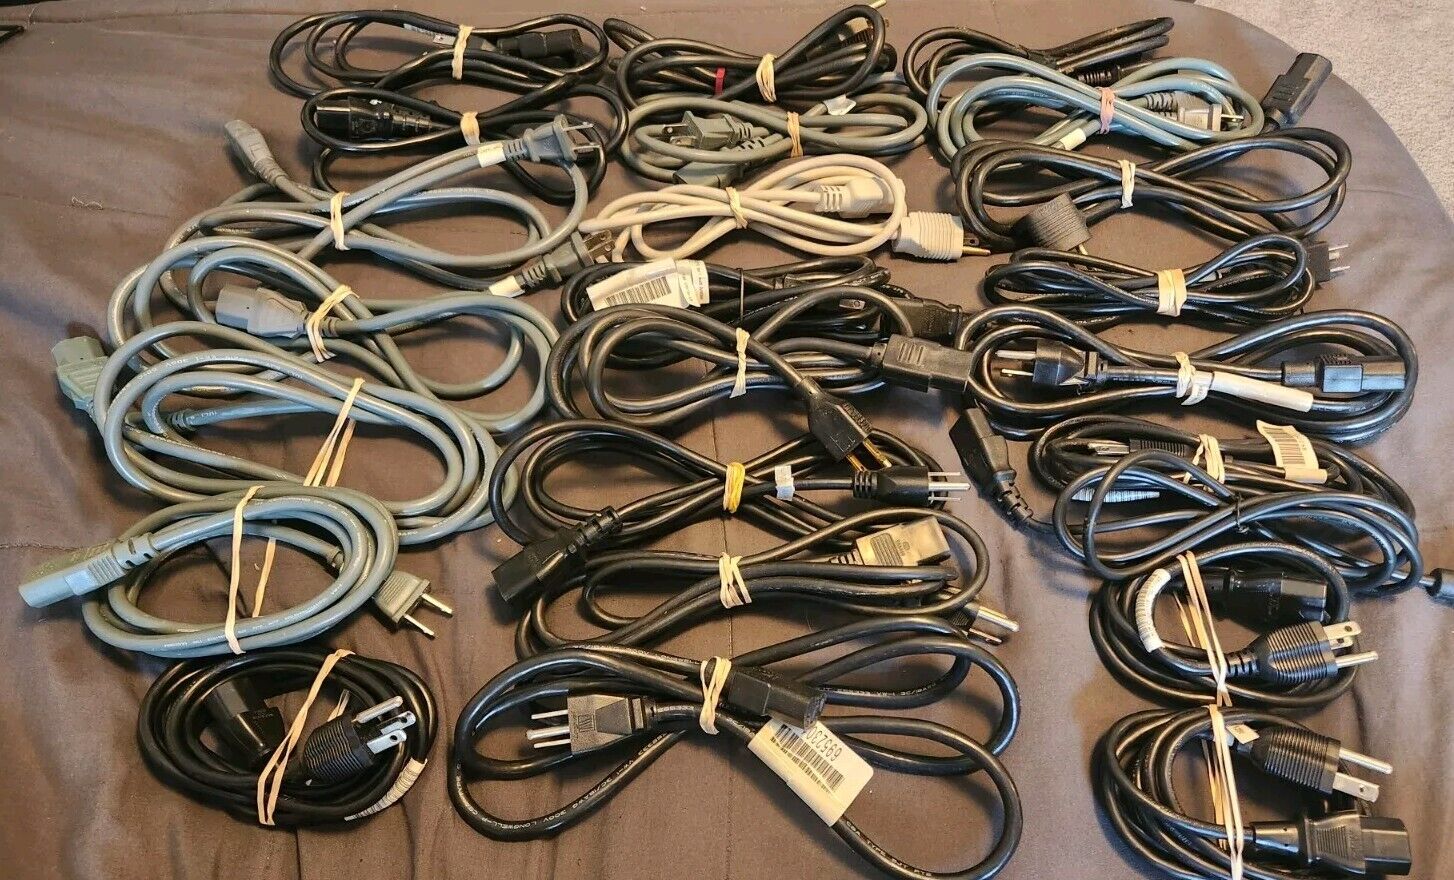 LOT OF 24 AC Power Supply 2/3 Prong Cords Bundle For Microsoft Xbox 360 Consoles